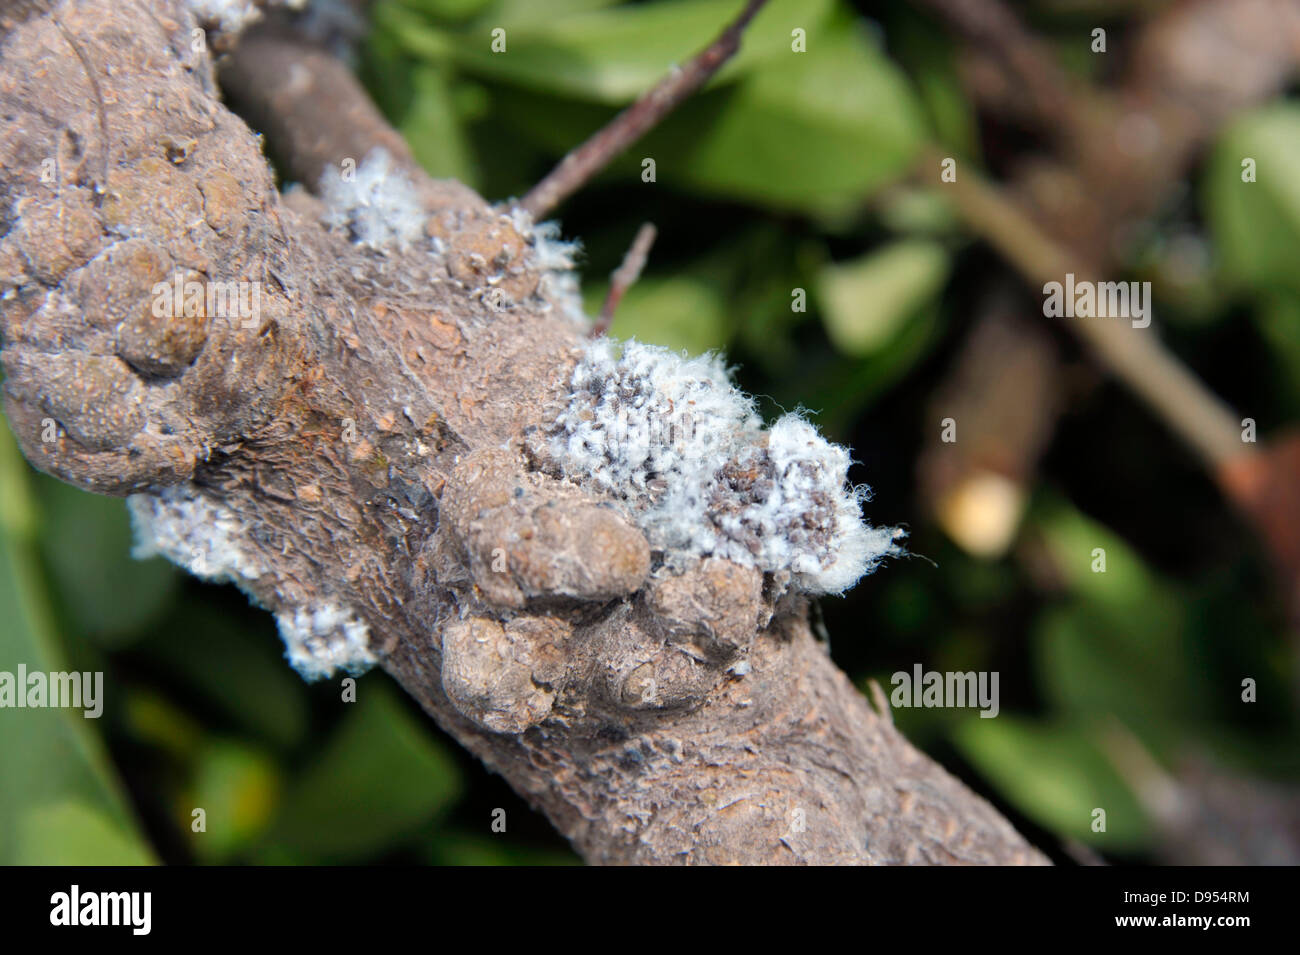 Damage caused by woolly aphids, Eriosomatinae, infesting a Pyracantha shrub. Stock Photo